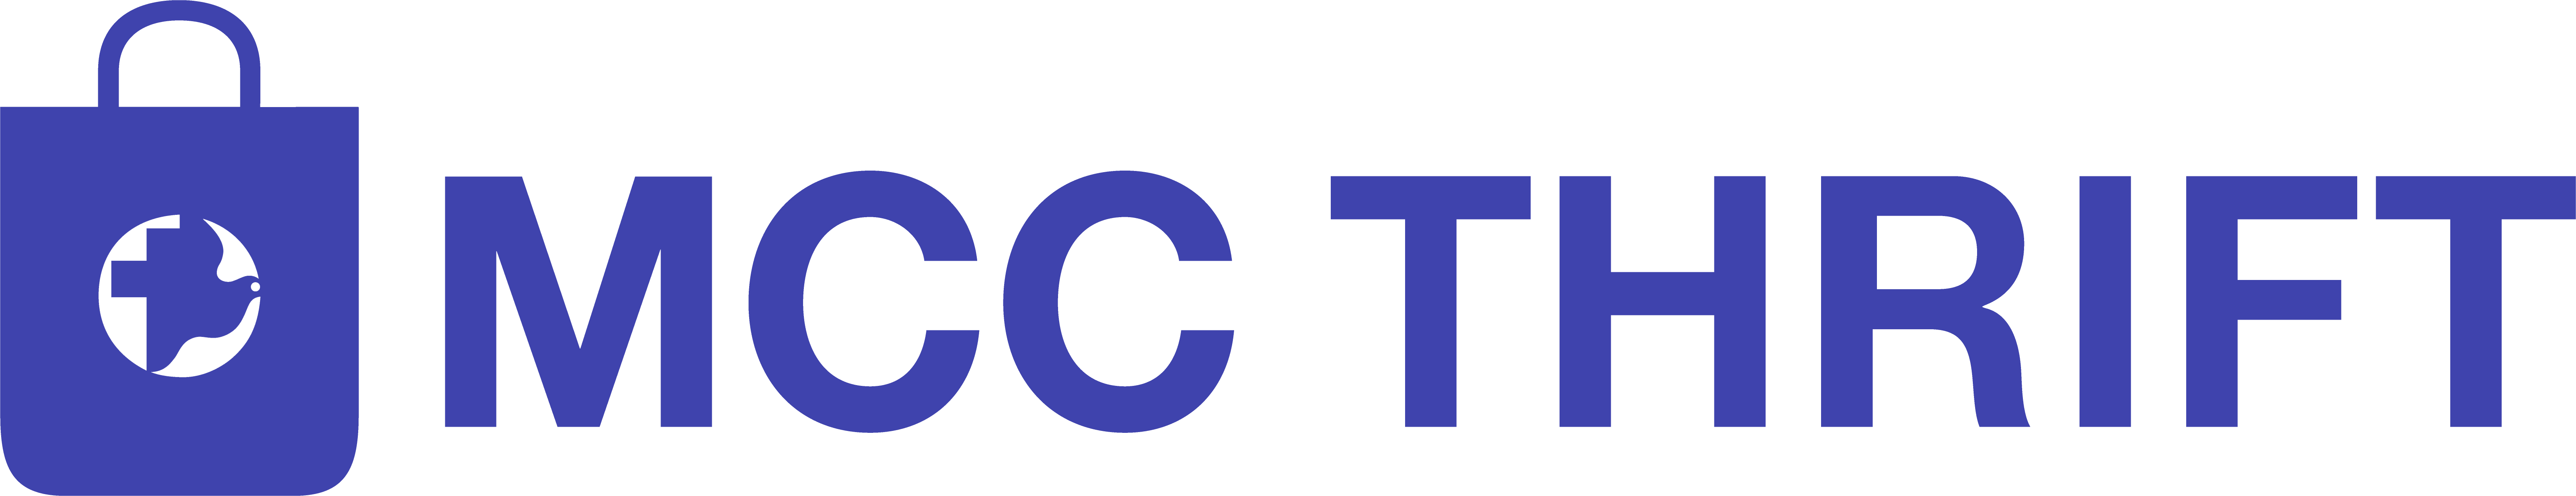 Logo reads "MCC Thrift" with blue bag icon.